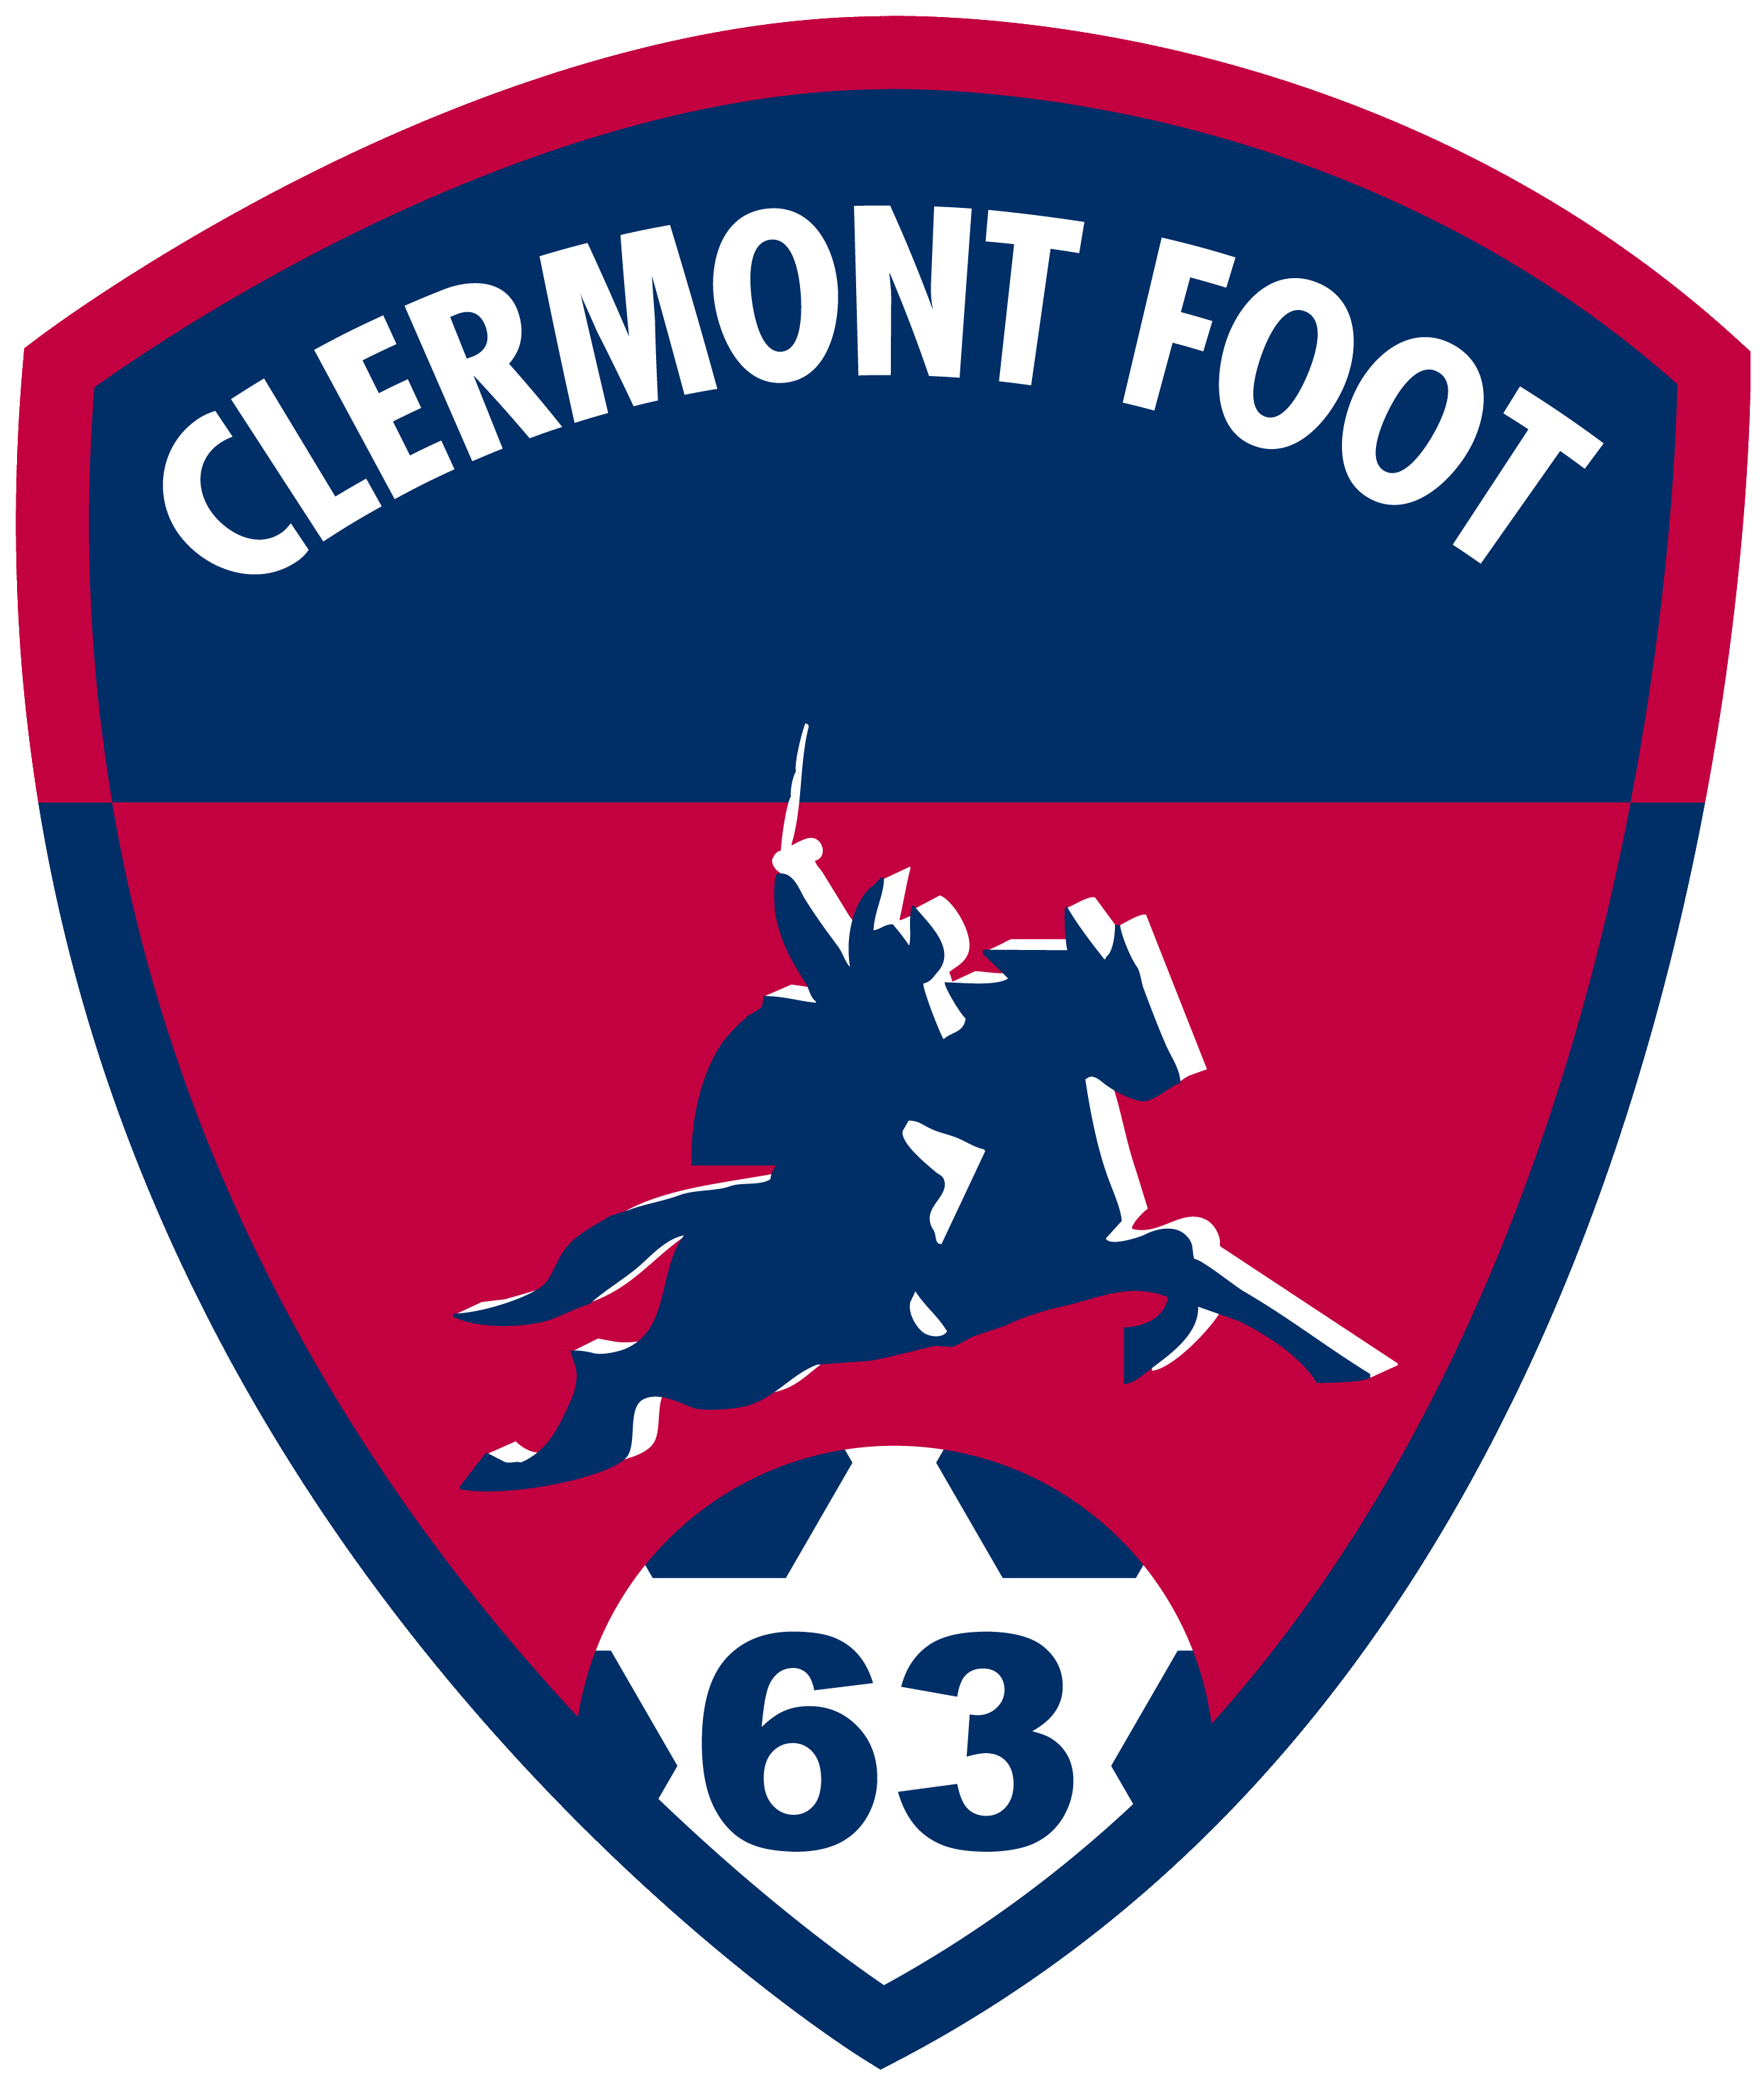 Clermont Foot vs Montpellier Prediction: Don't rule out anything just yet.